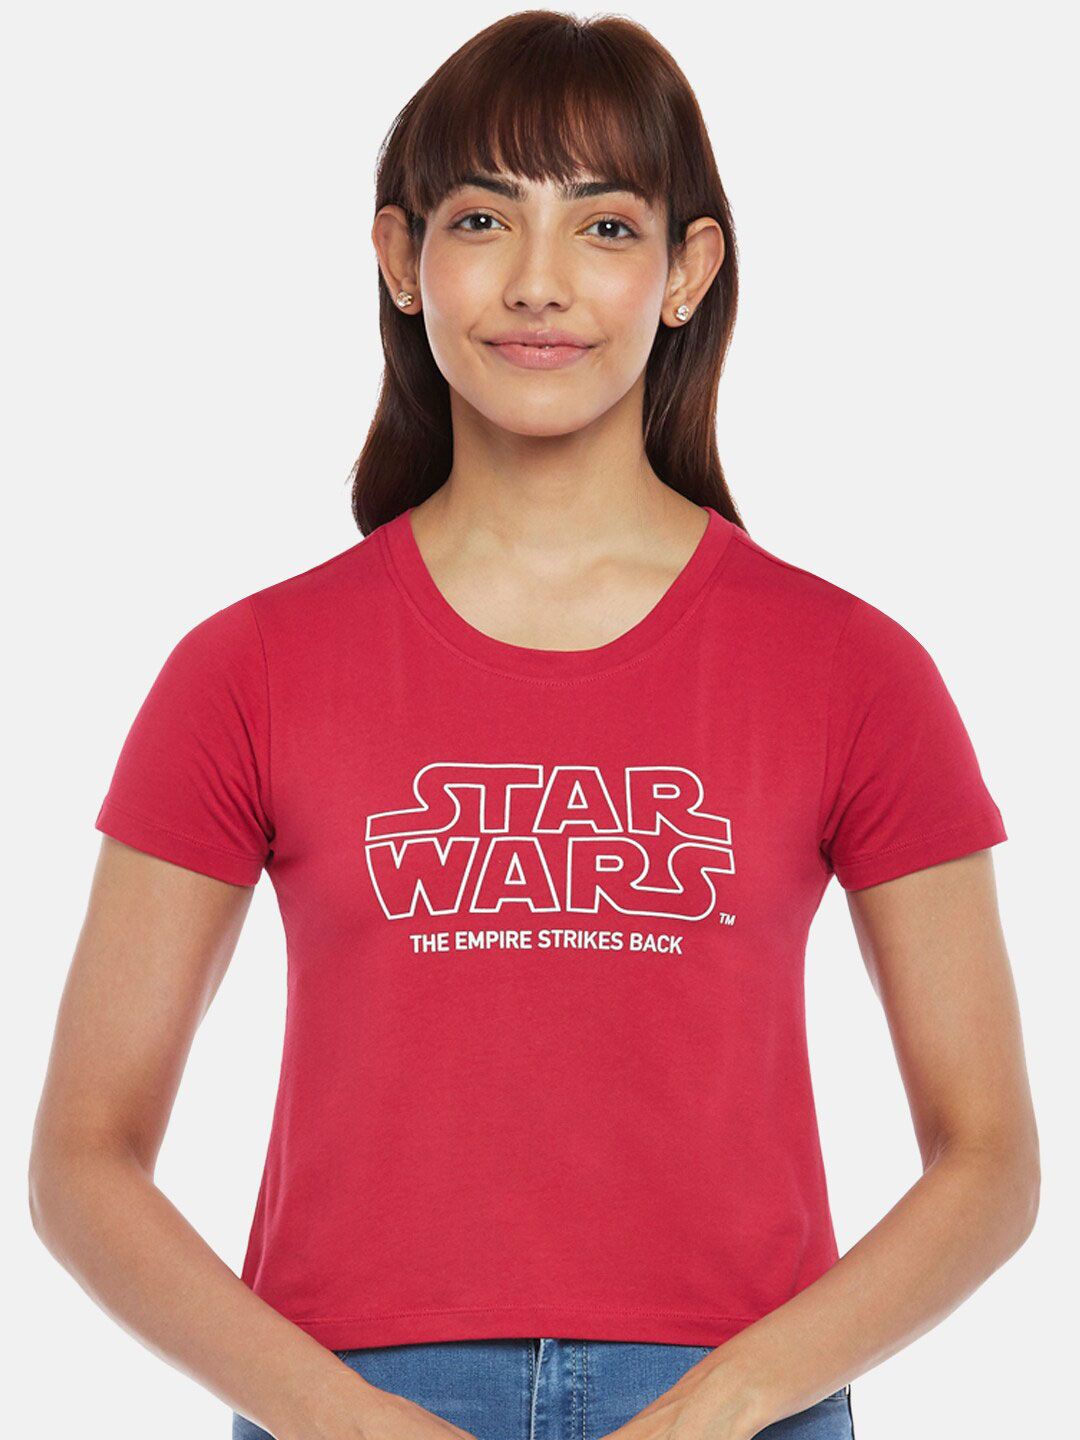 Honey by Pantaloons Star Wars Typography Printed Cotton Crop Top Price in India